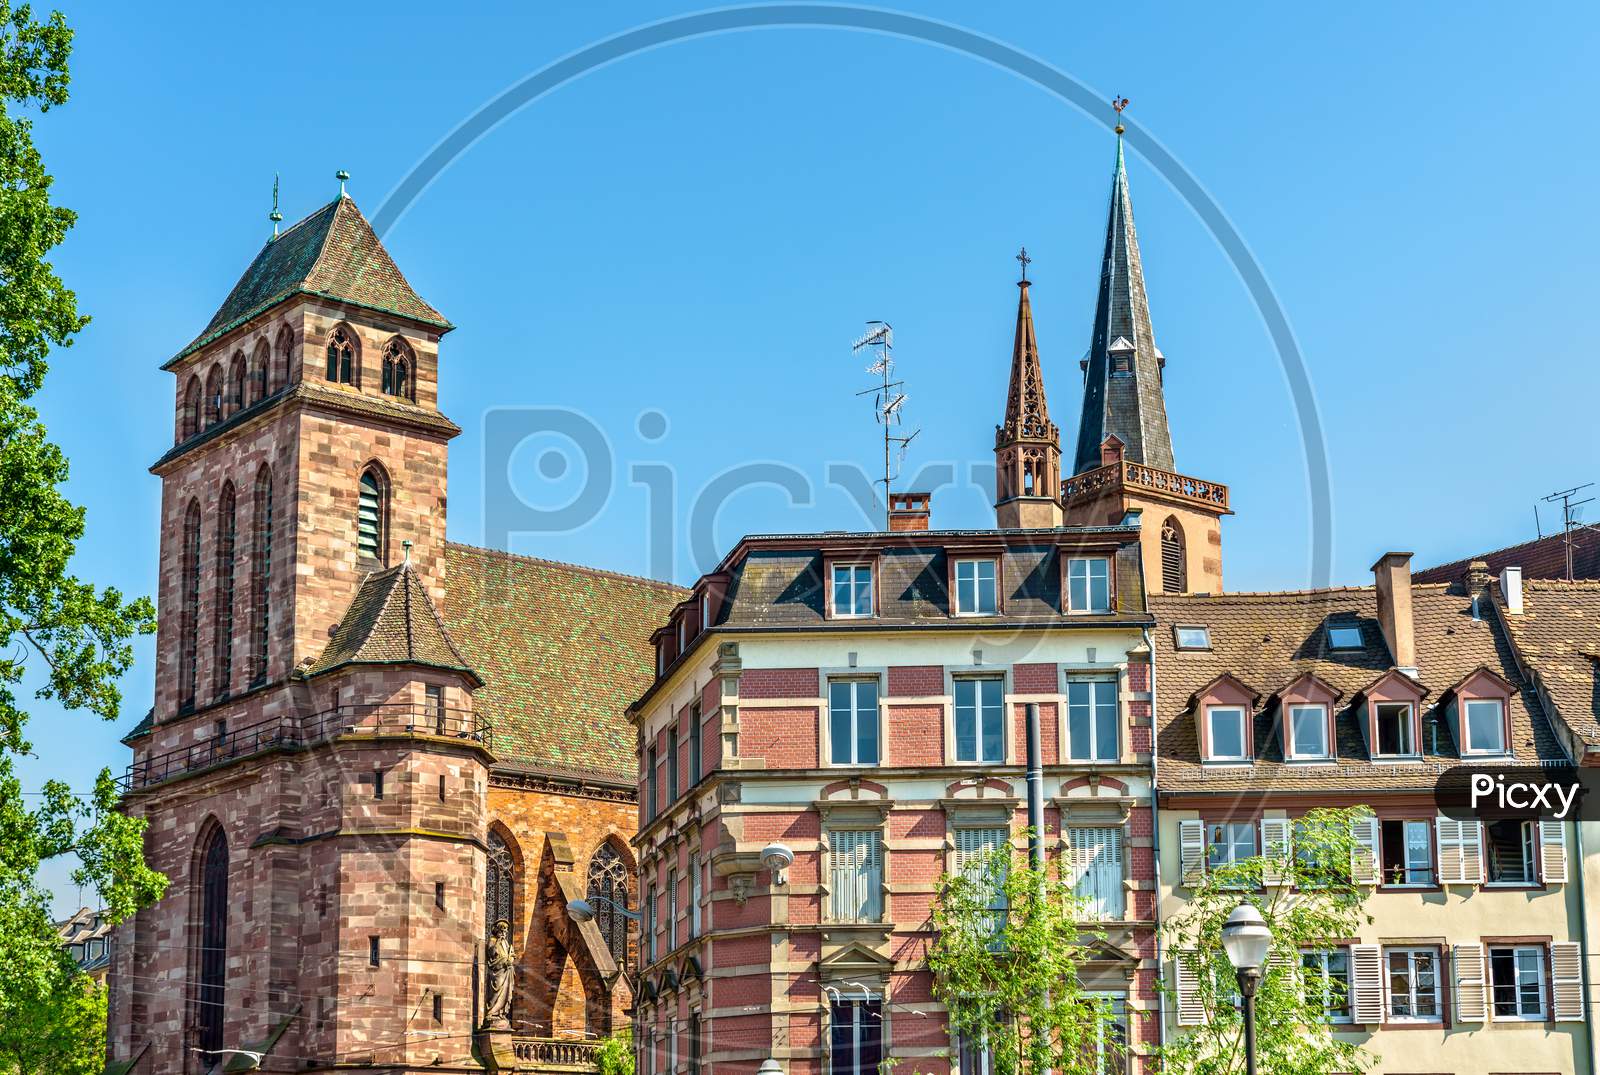 The Church Of Old Saint Peter In Strasbourg, France